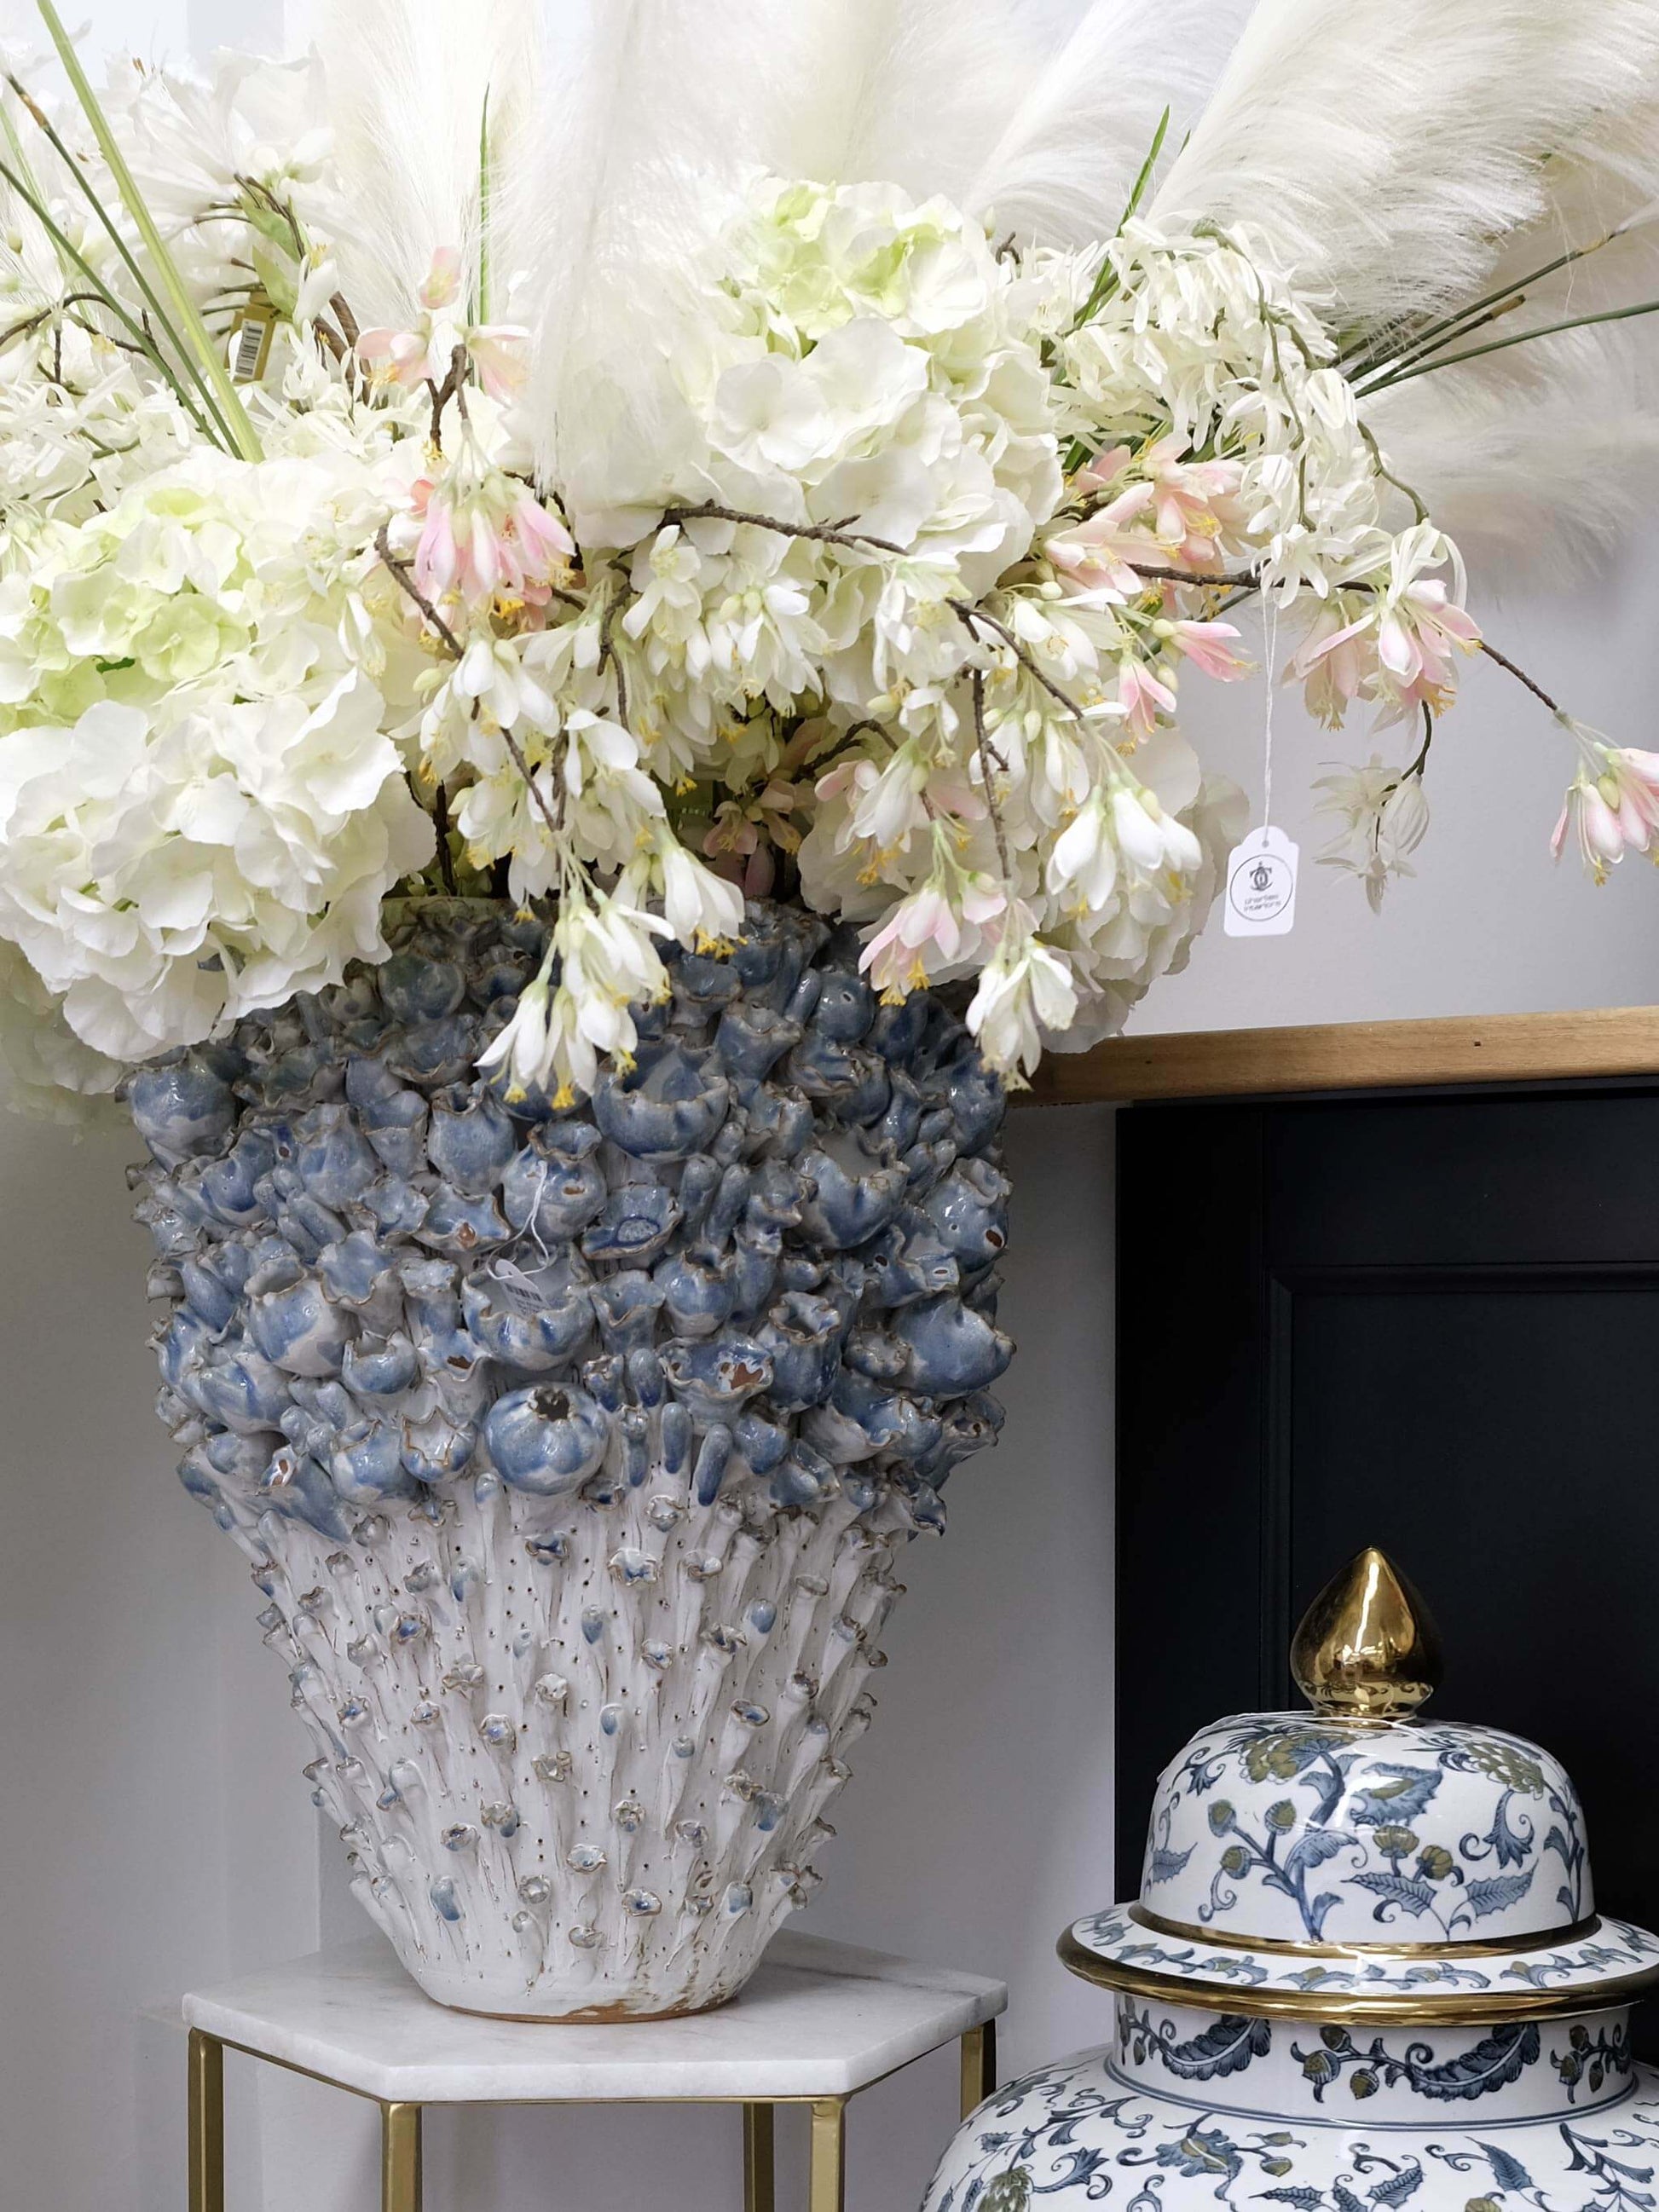 Vase Ceramic White with Hand-crafted Blue Flowers - Shop Charlies Interiors